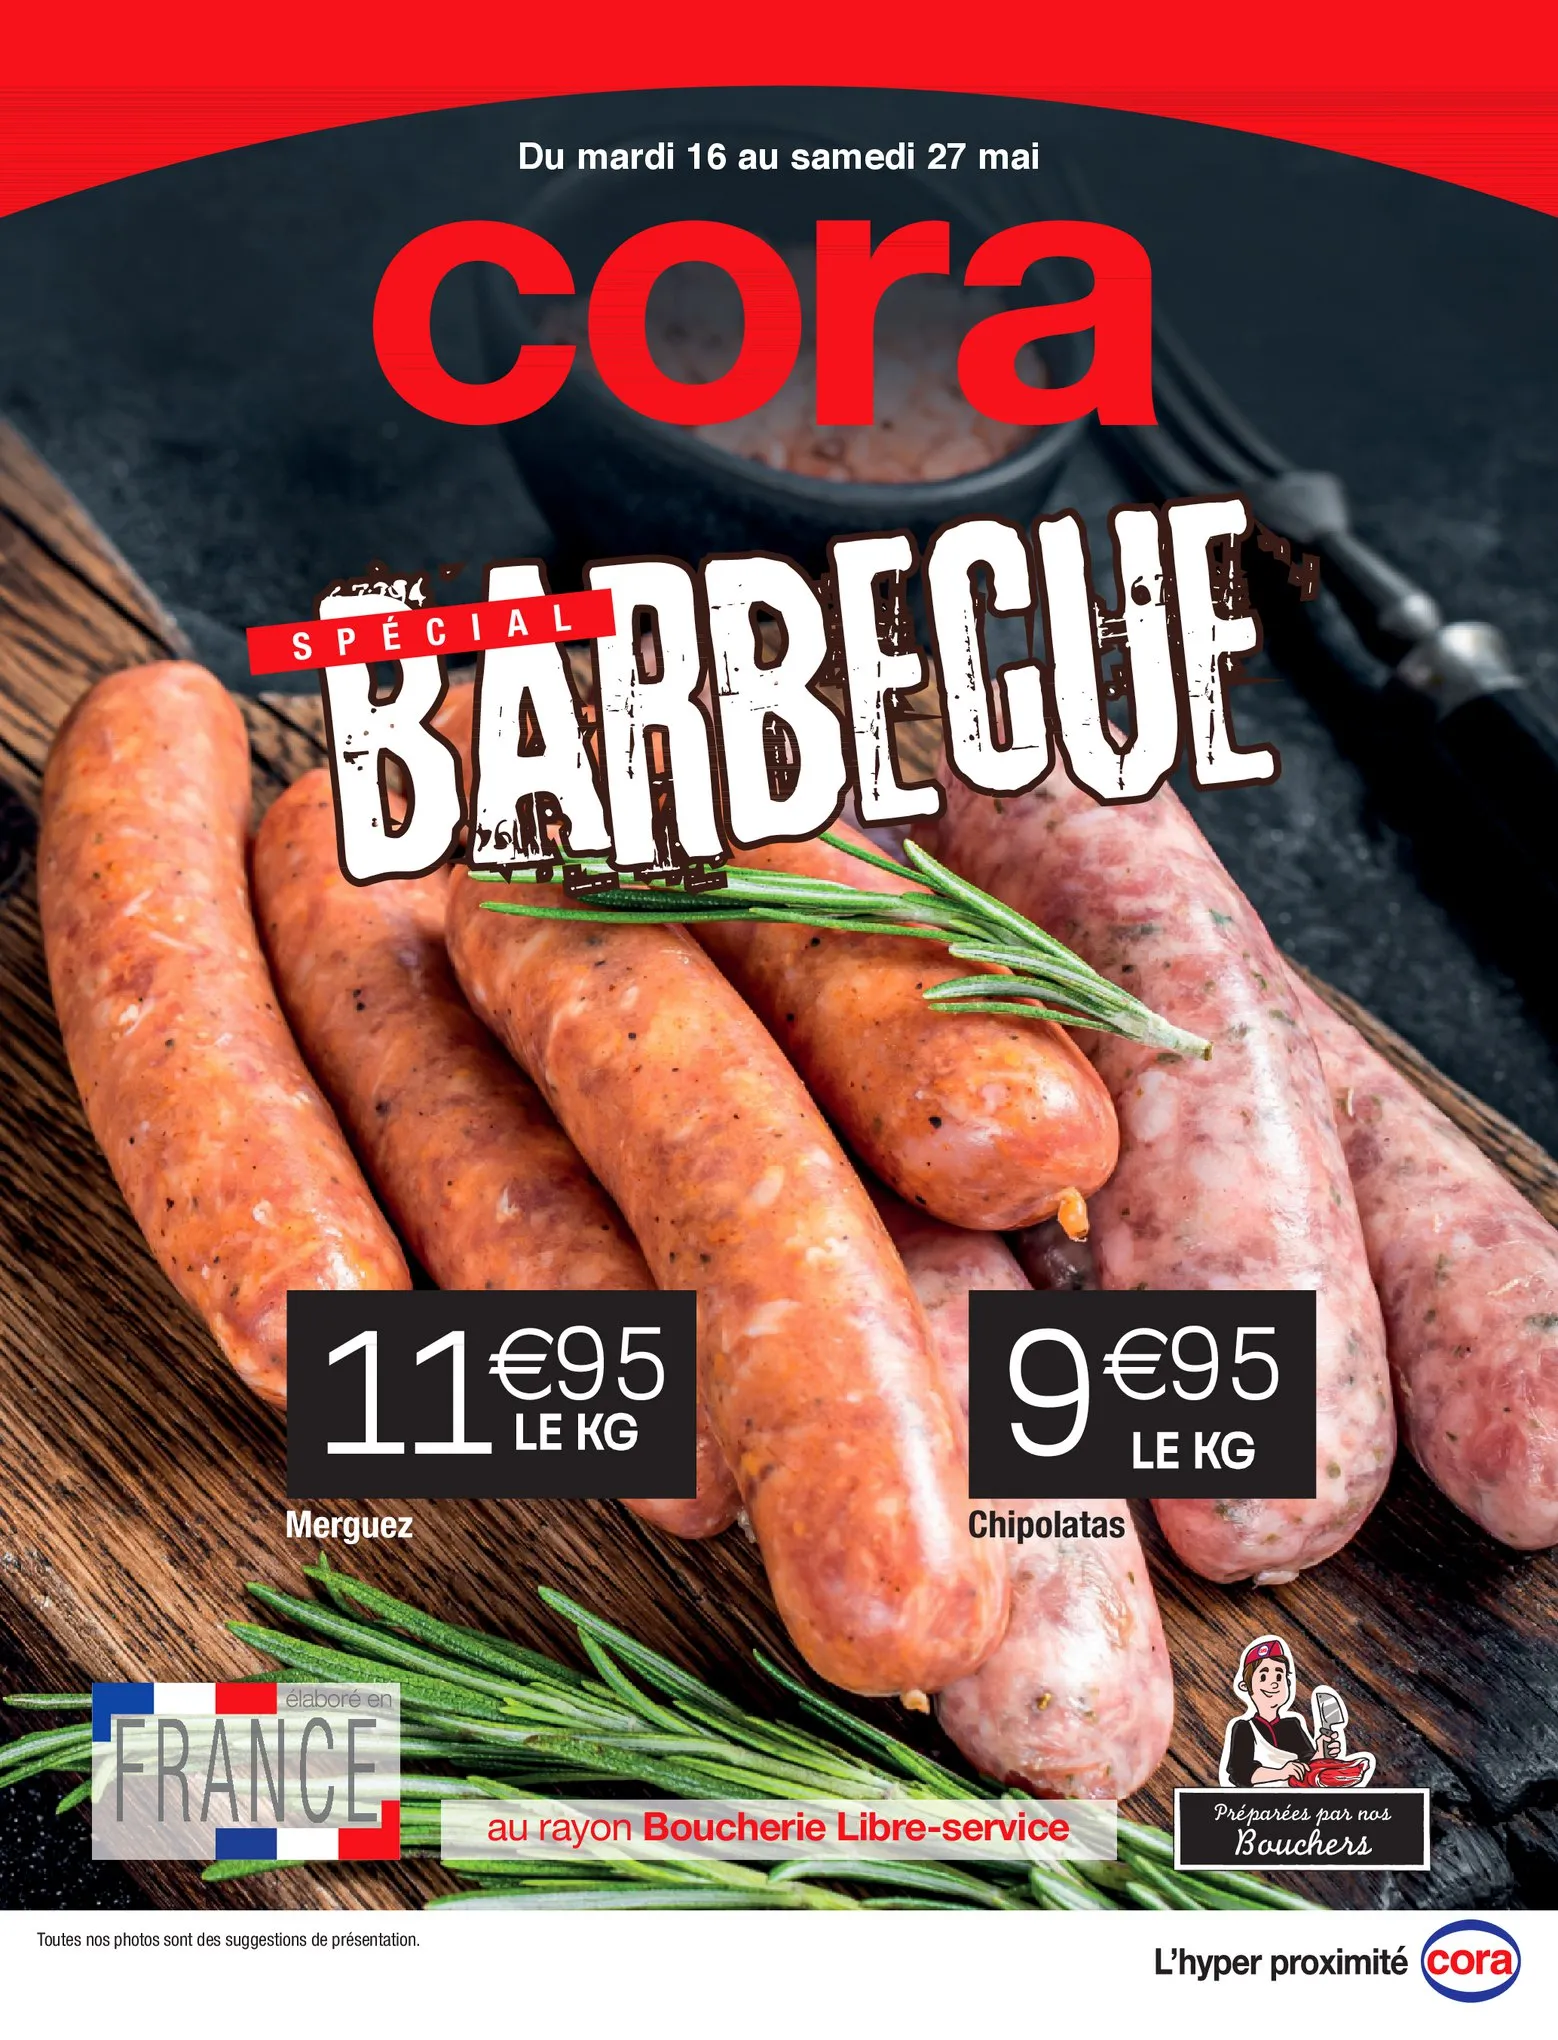 Catalogue Spécial Barbecue, page 00001